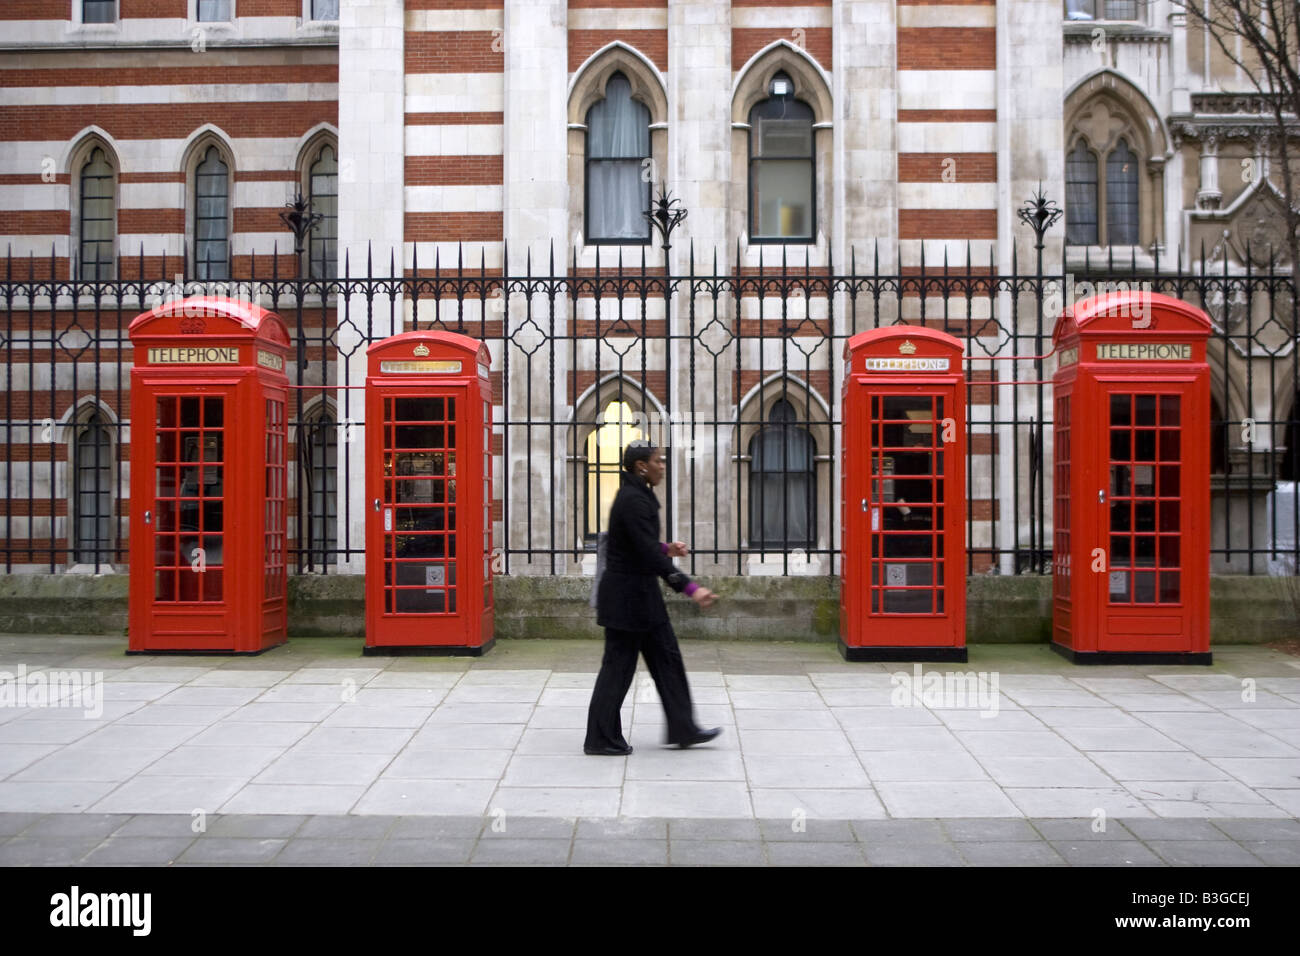 Four red telephone boxes in a row Stock Photo